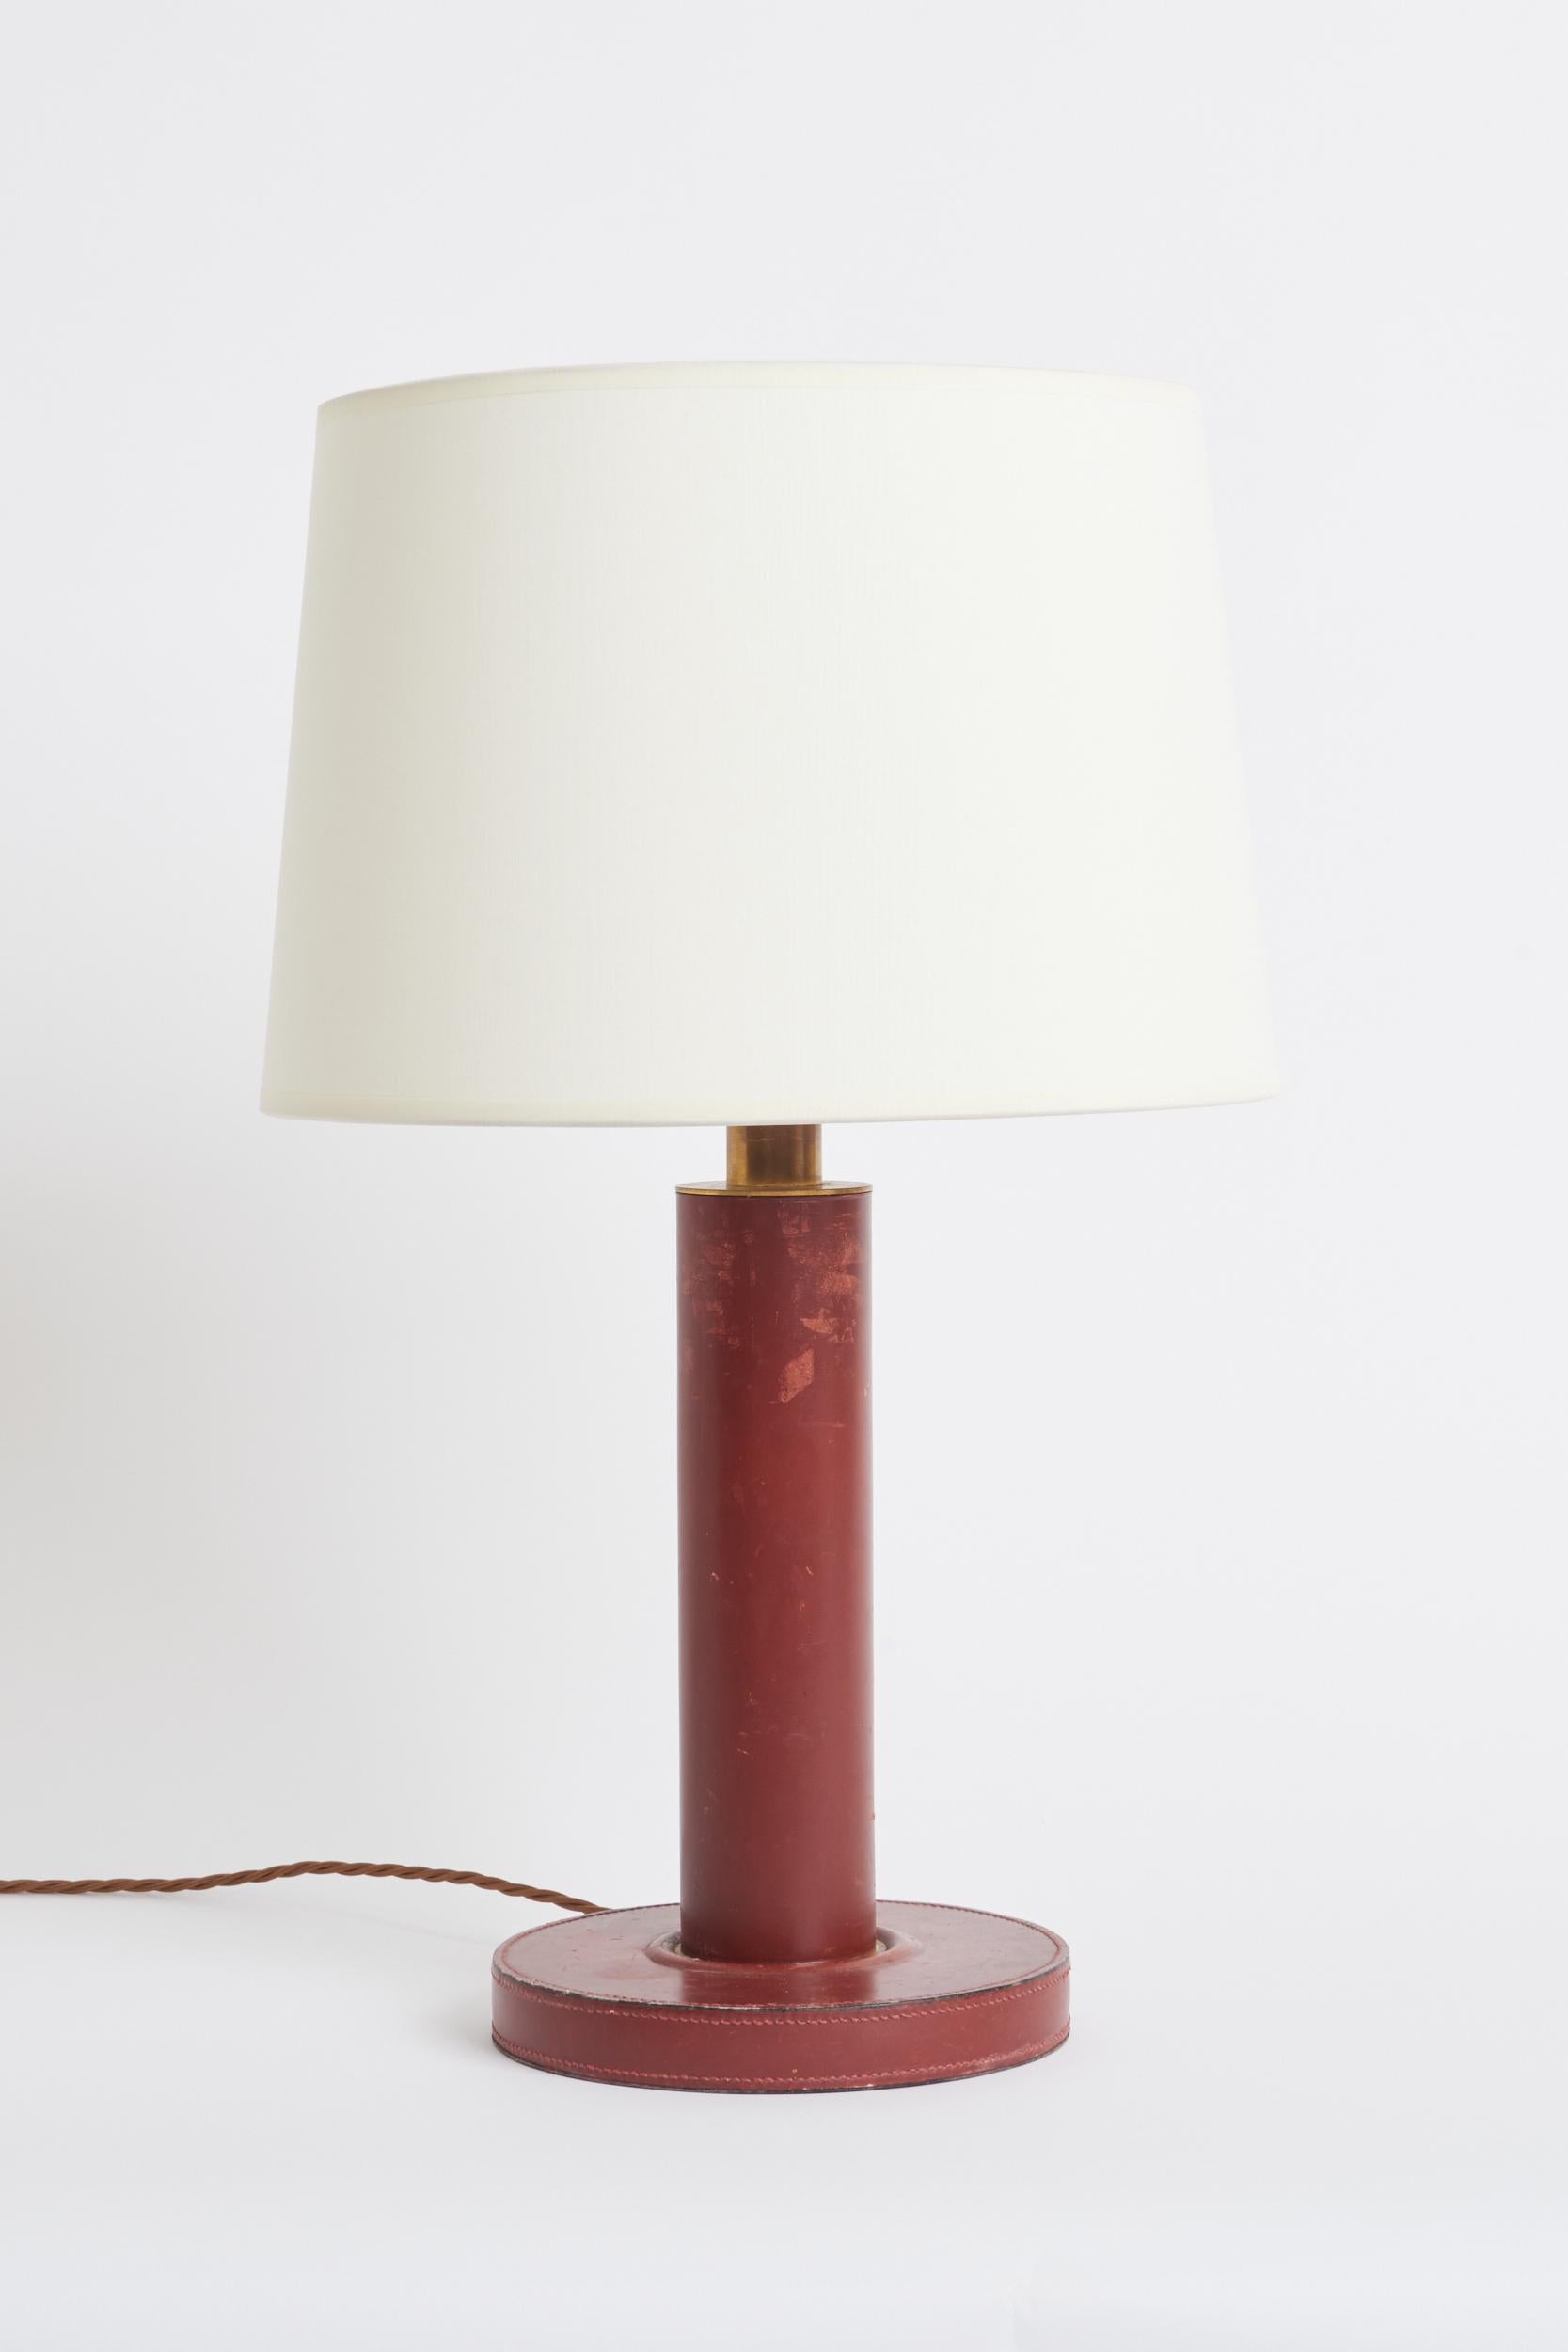 A red leather table lamp, in the manner of Paul Dupre Lafon.
France, 1930s.
With the shade: 57.5 cm high by 35.5 cm diameter
Lamp base only: 39 cm high by 20 cm diameter.